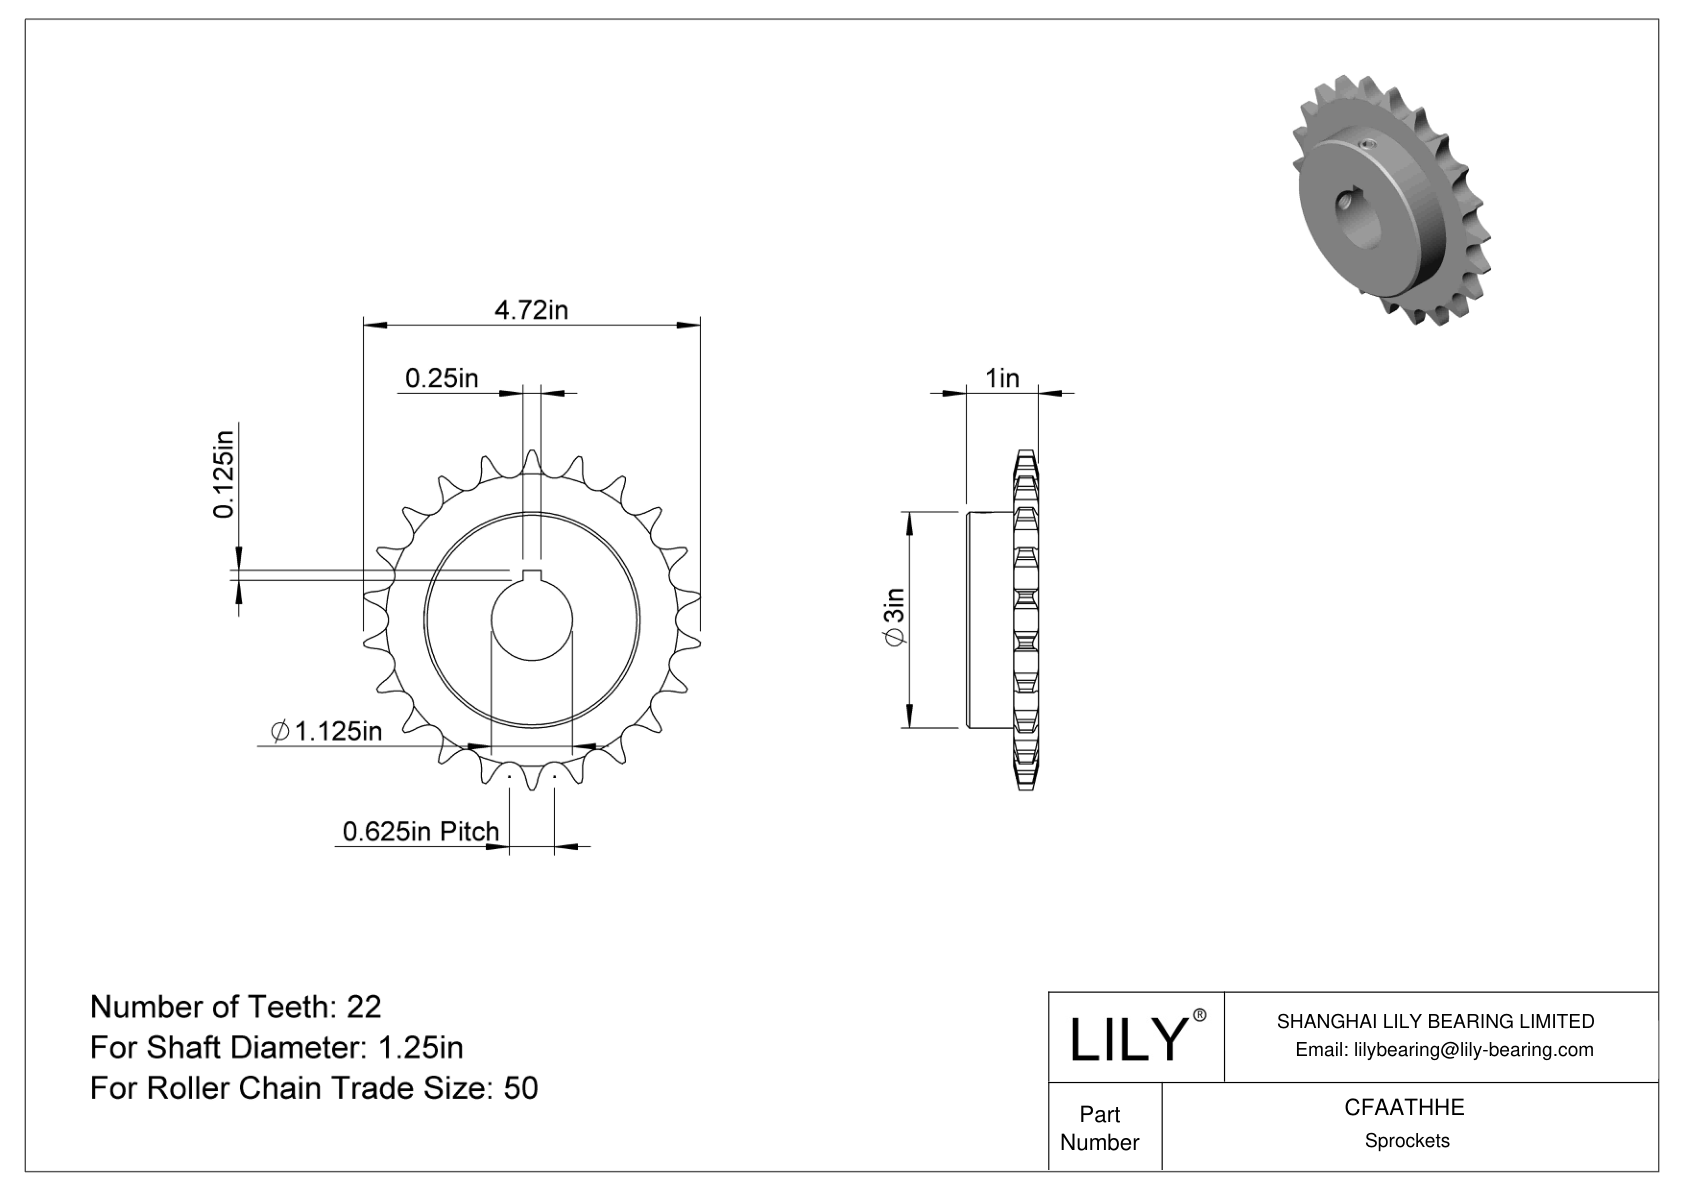 CFAATHHE Wear-Resistant Sprockets for ANSI Roller Chain cad drawing